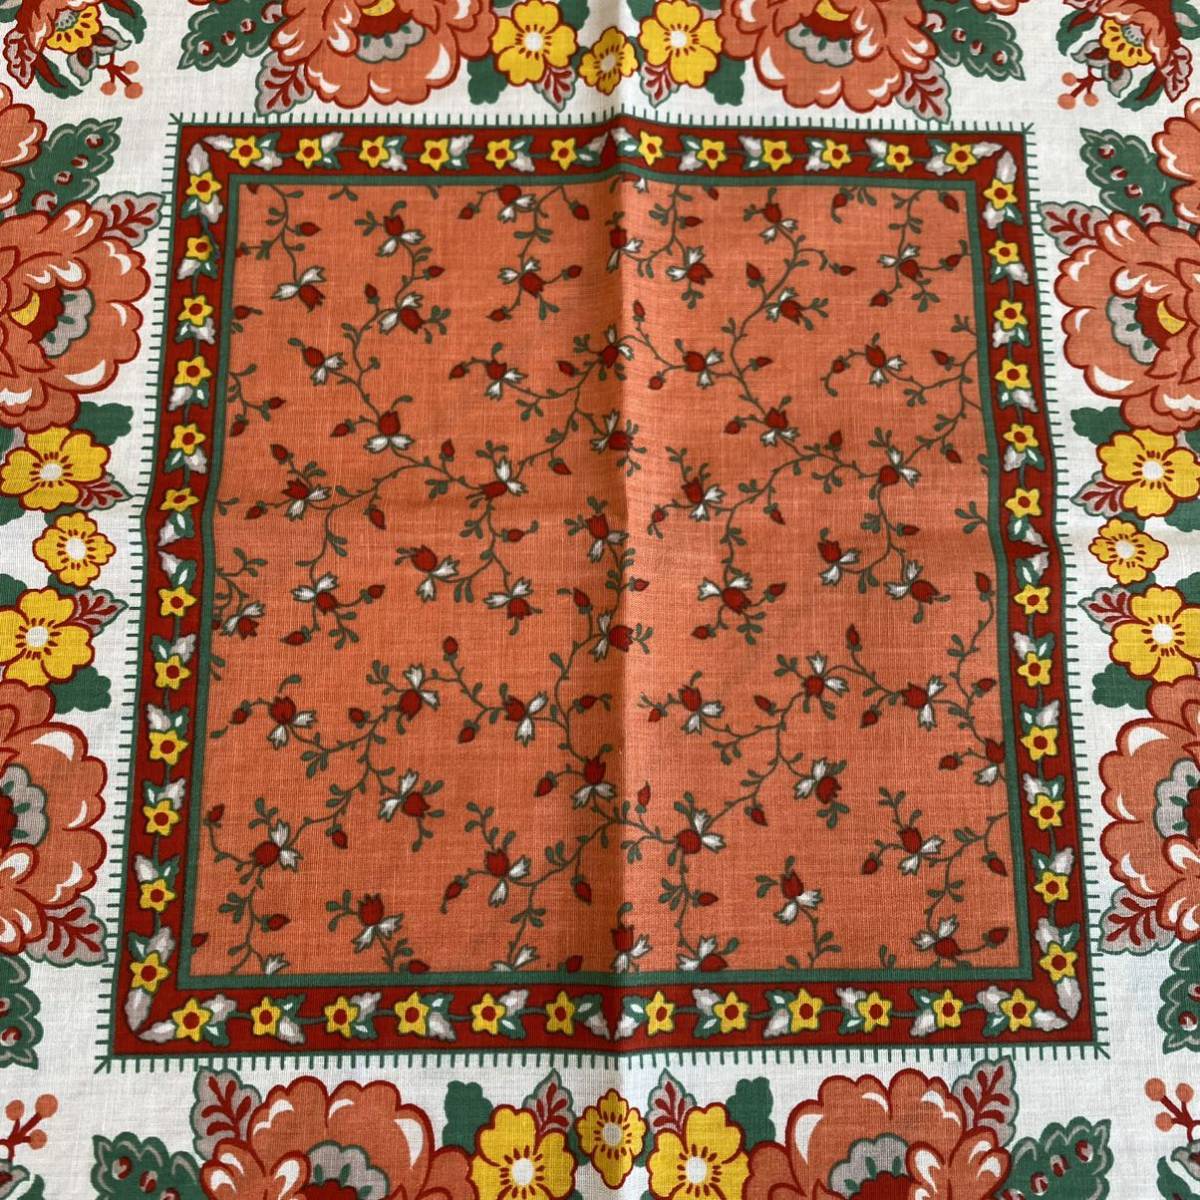  free shipping Vintage beautiful bandana floral print flower beautiful goods red orange Made in USA handkerchie America stock miscellaneous goods old clothes Vintage A0477